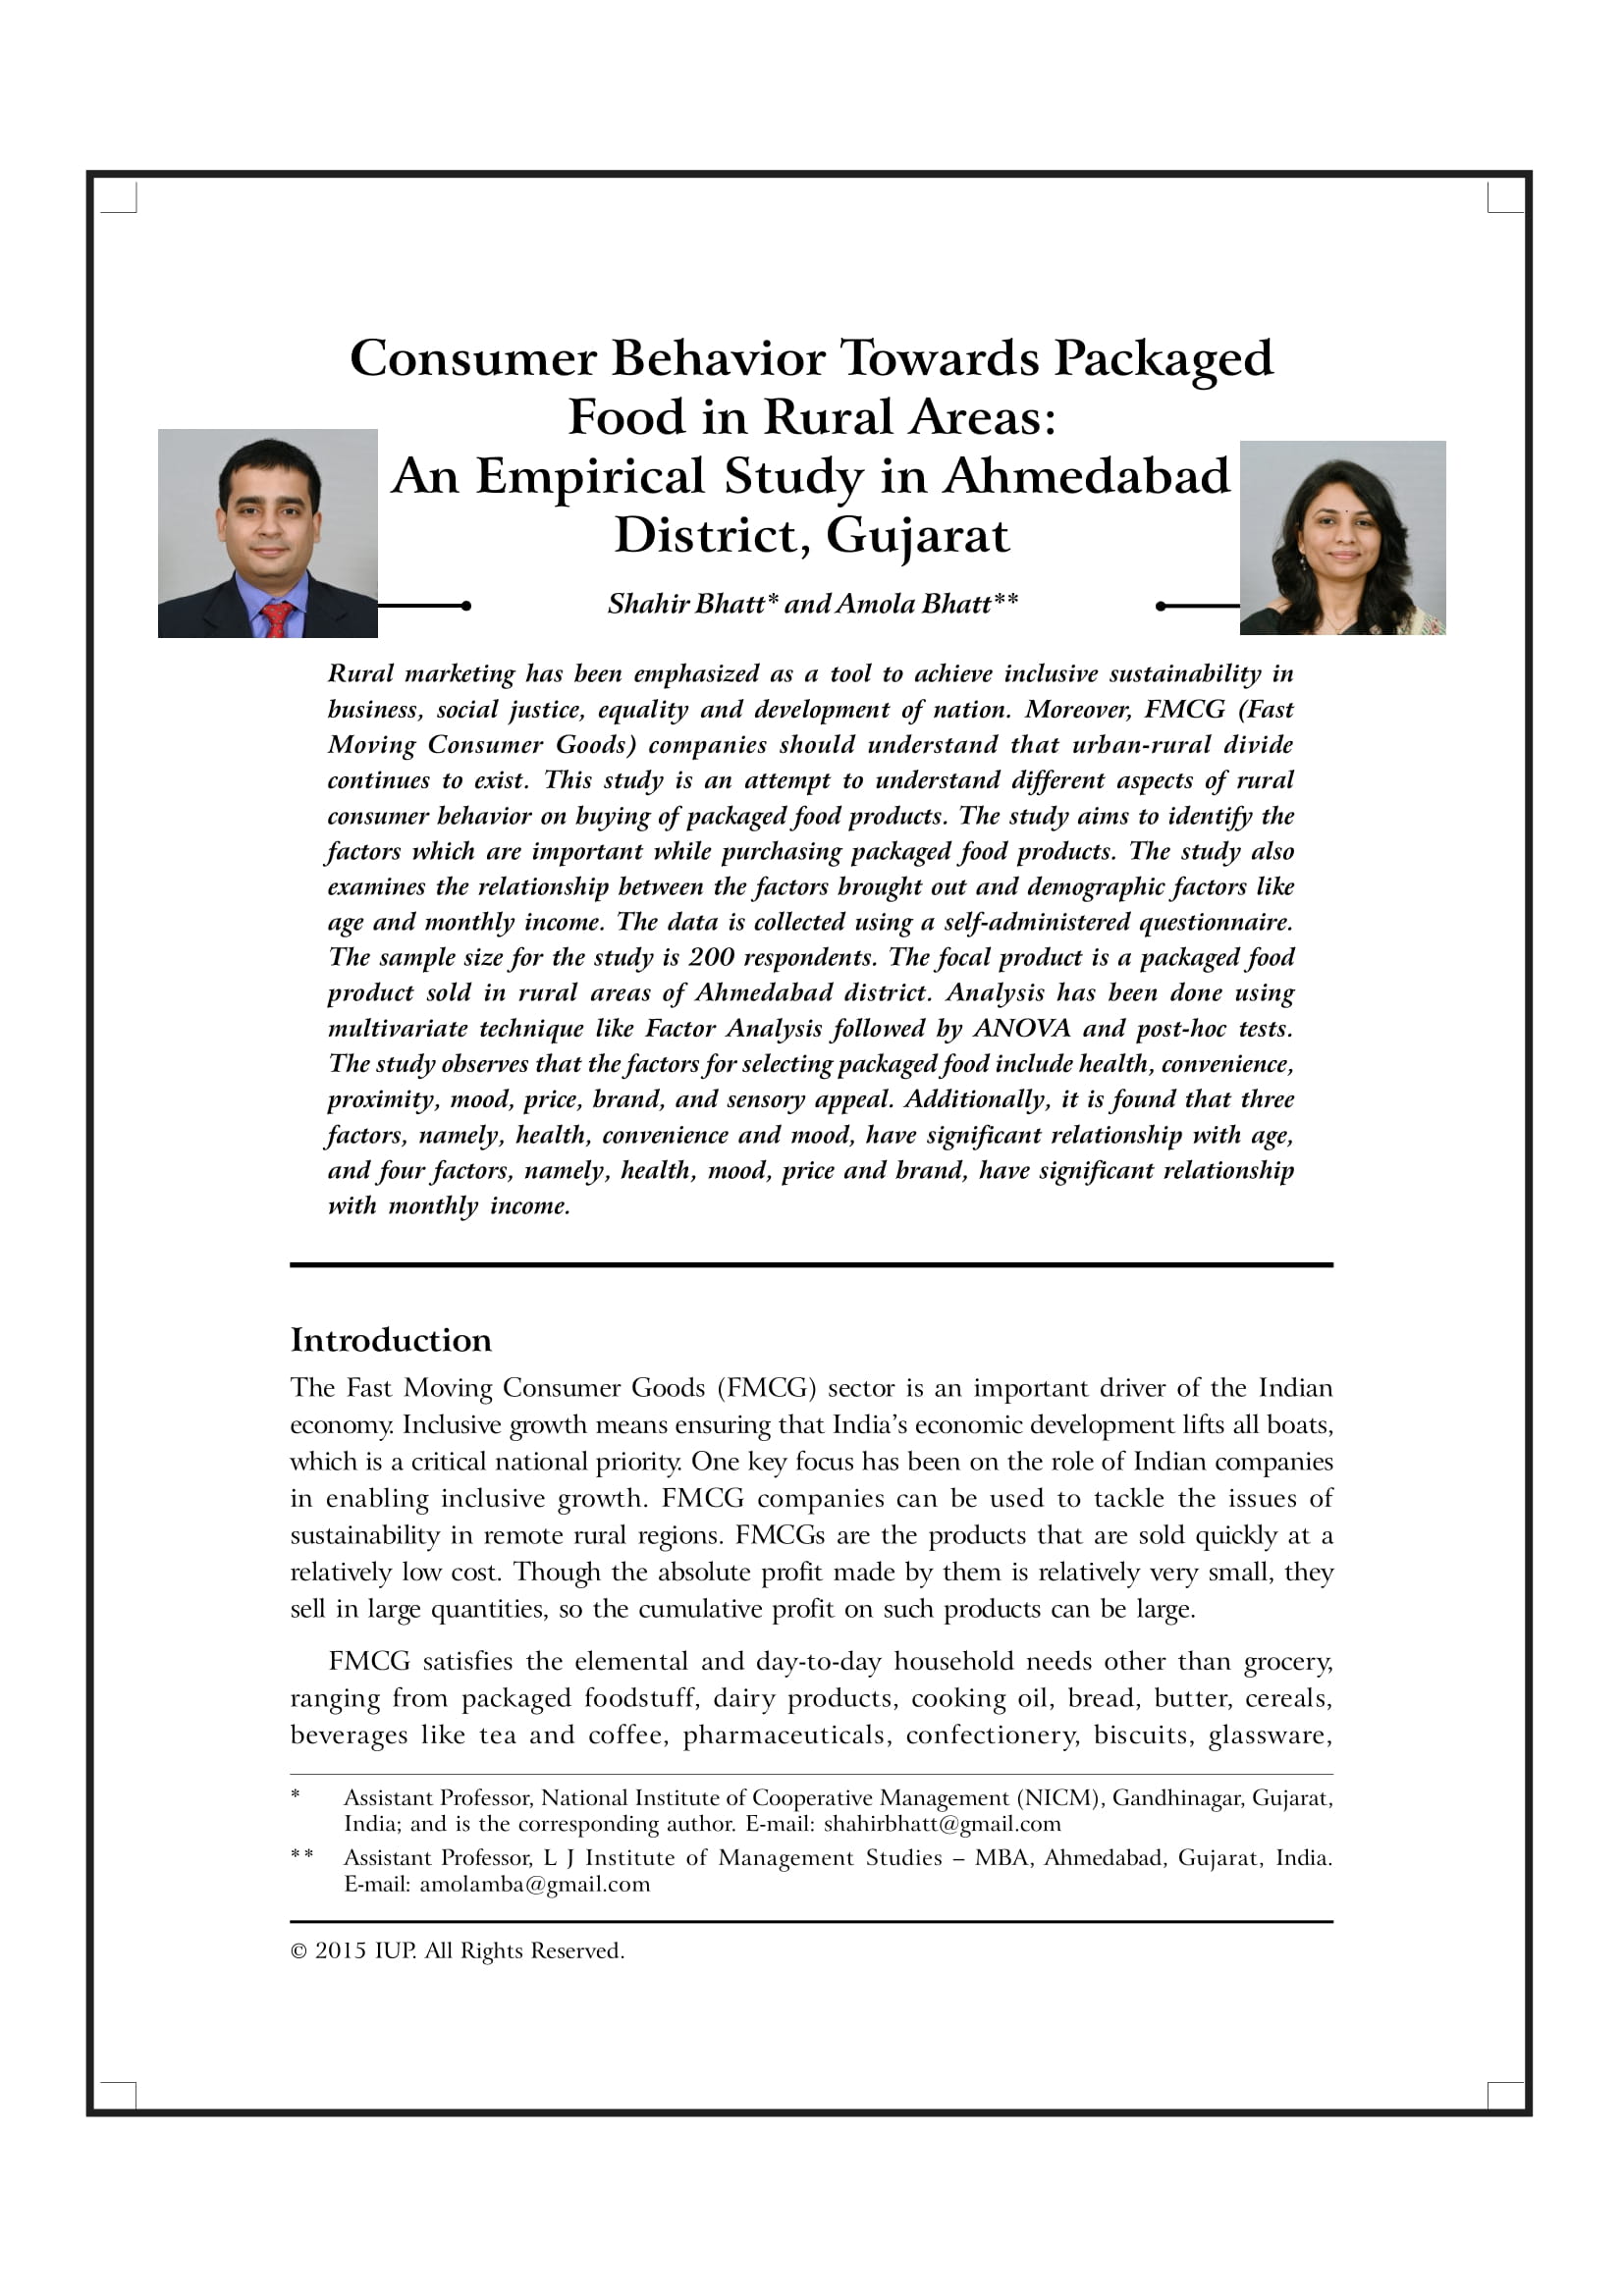 Consumer Behavior Towards Packaged Food in Rural Areas: An Empirical Study in Ahmedabad District, Gujarat